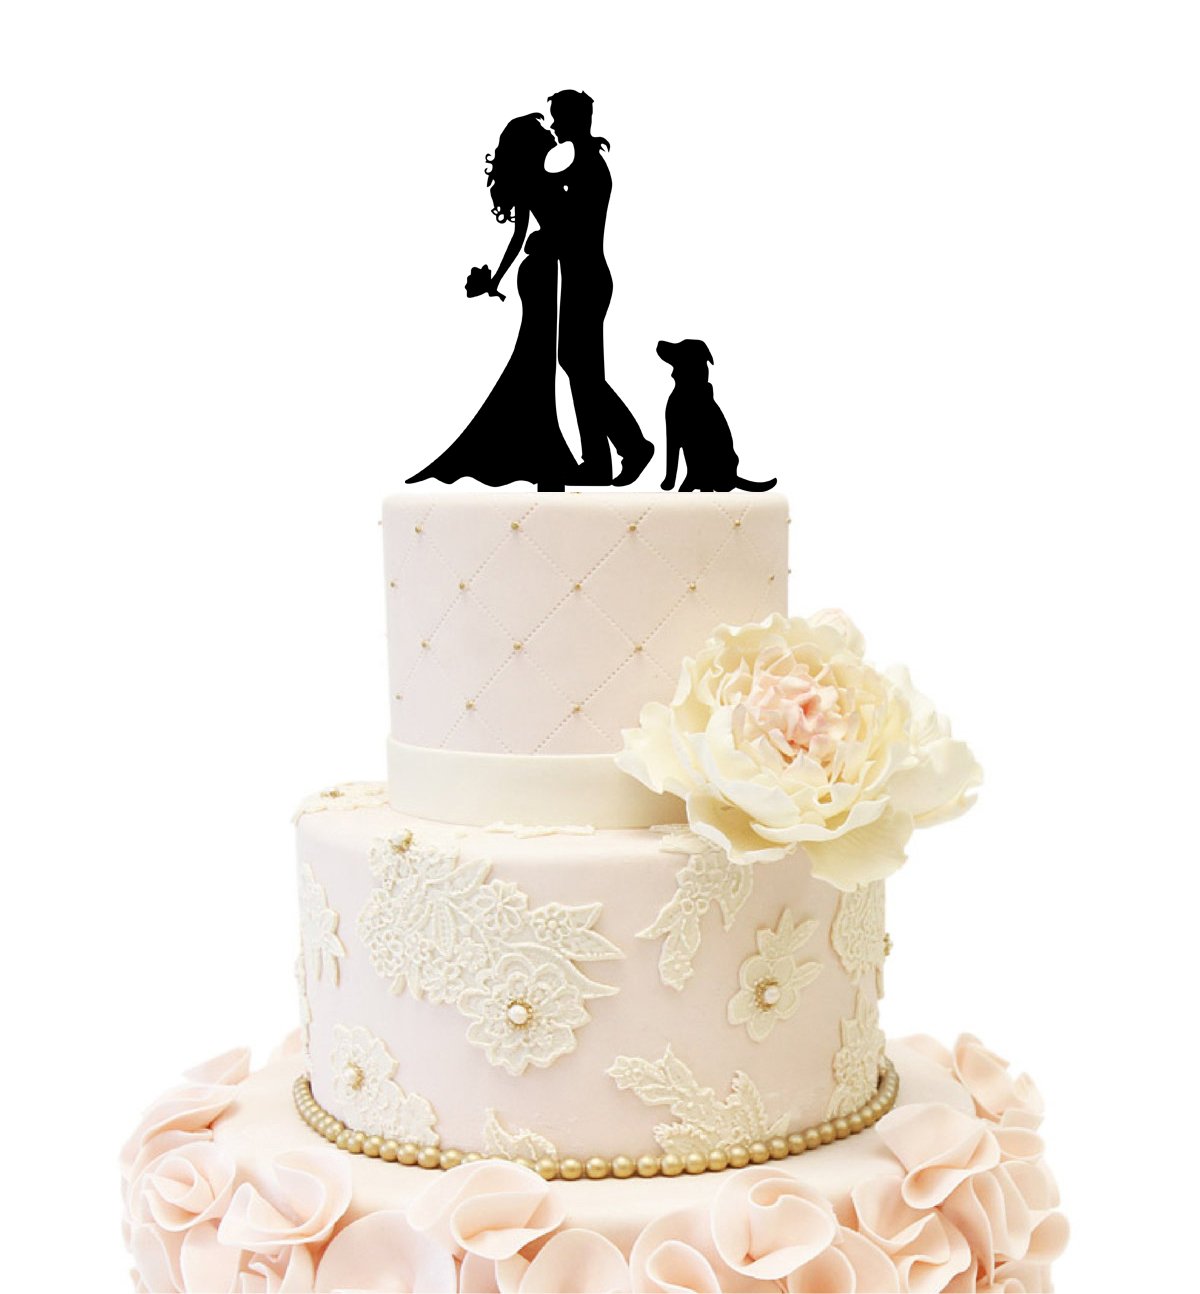 Uniquemystyle Silhouette Couple & Dog Wedding Cake Topper